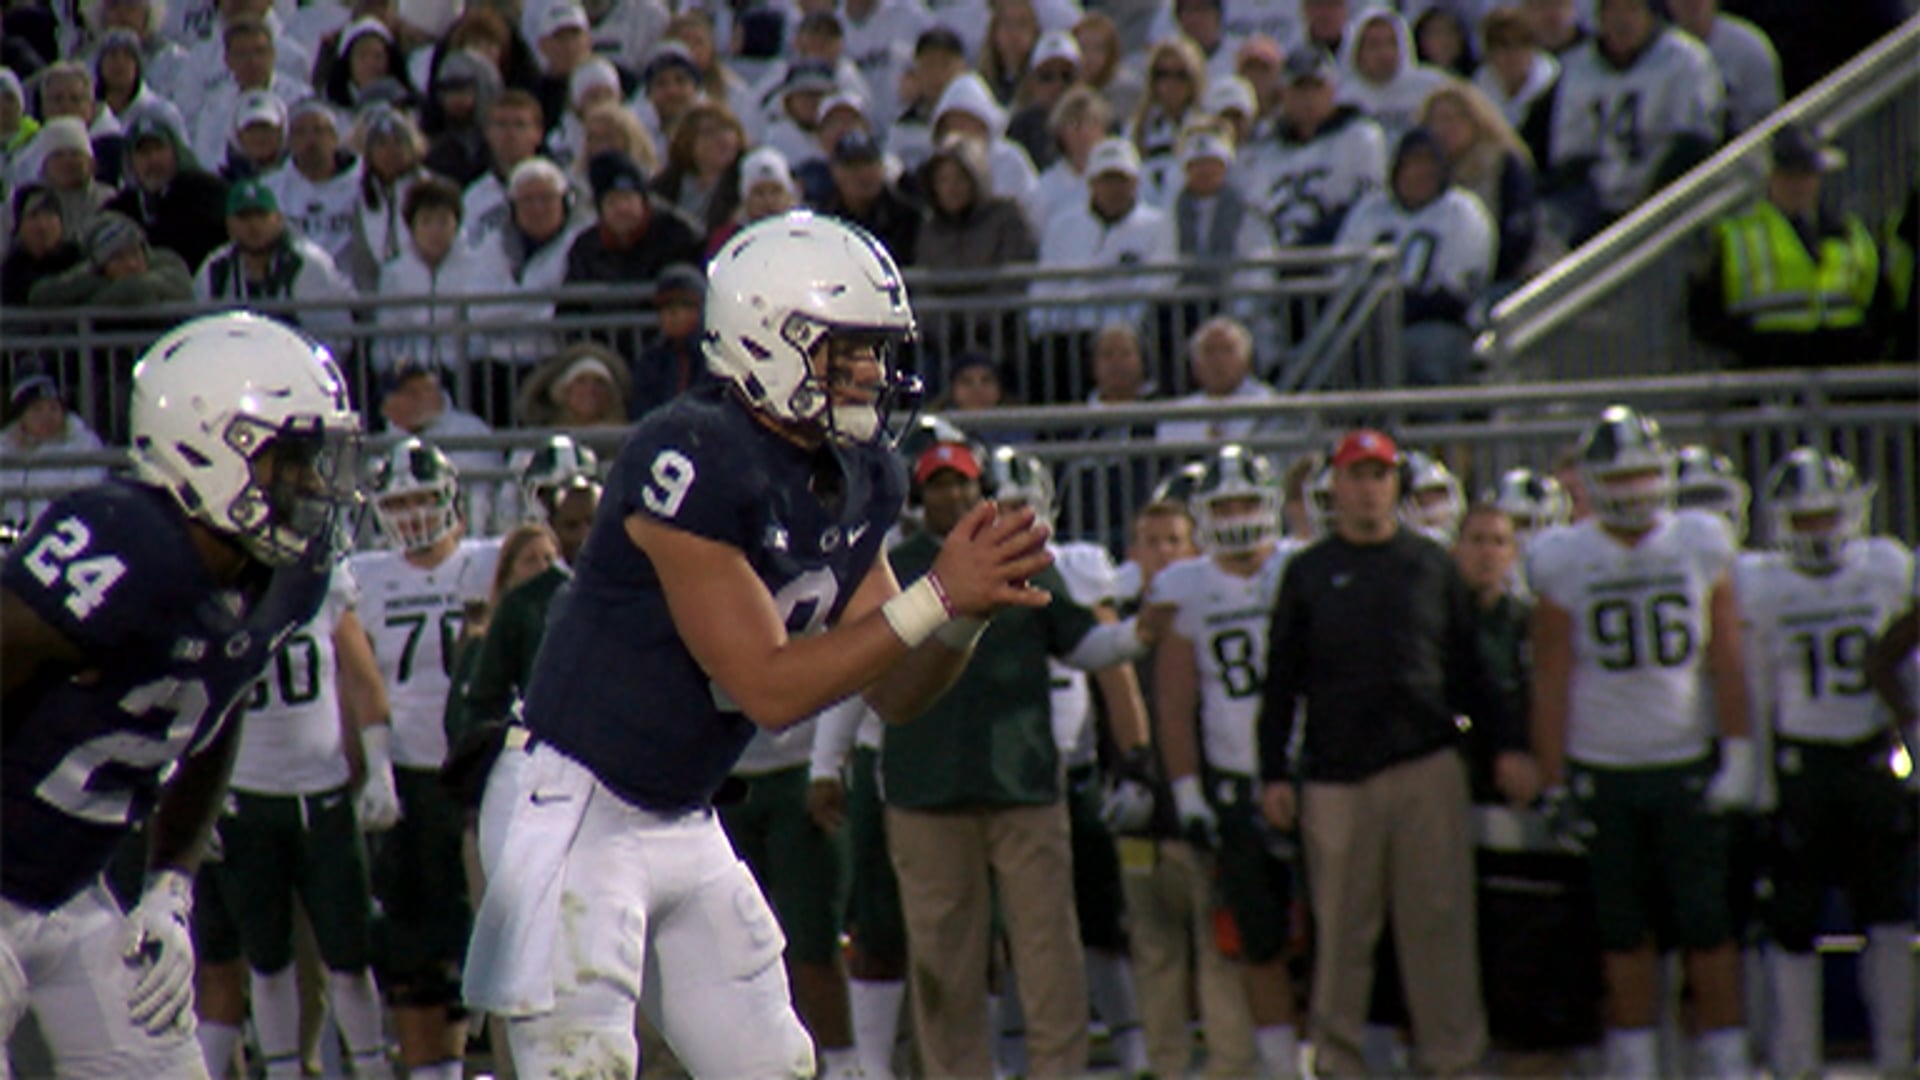 Trace McSorley on "Hey Rookie"